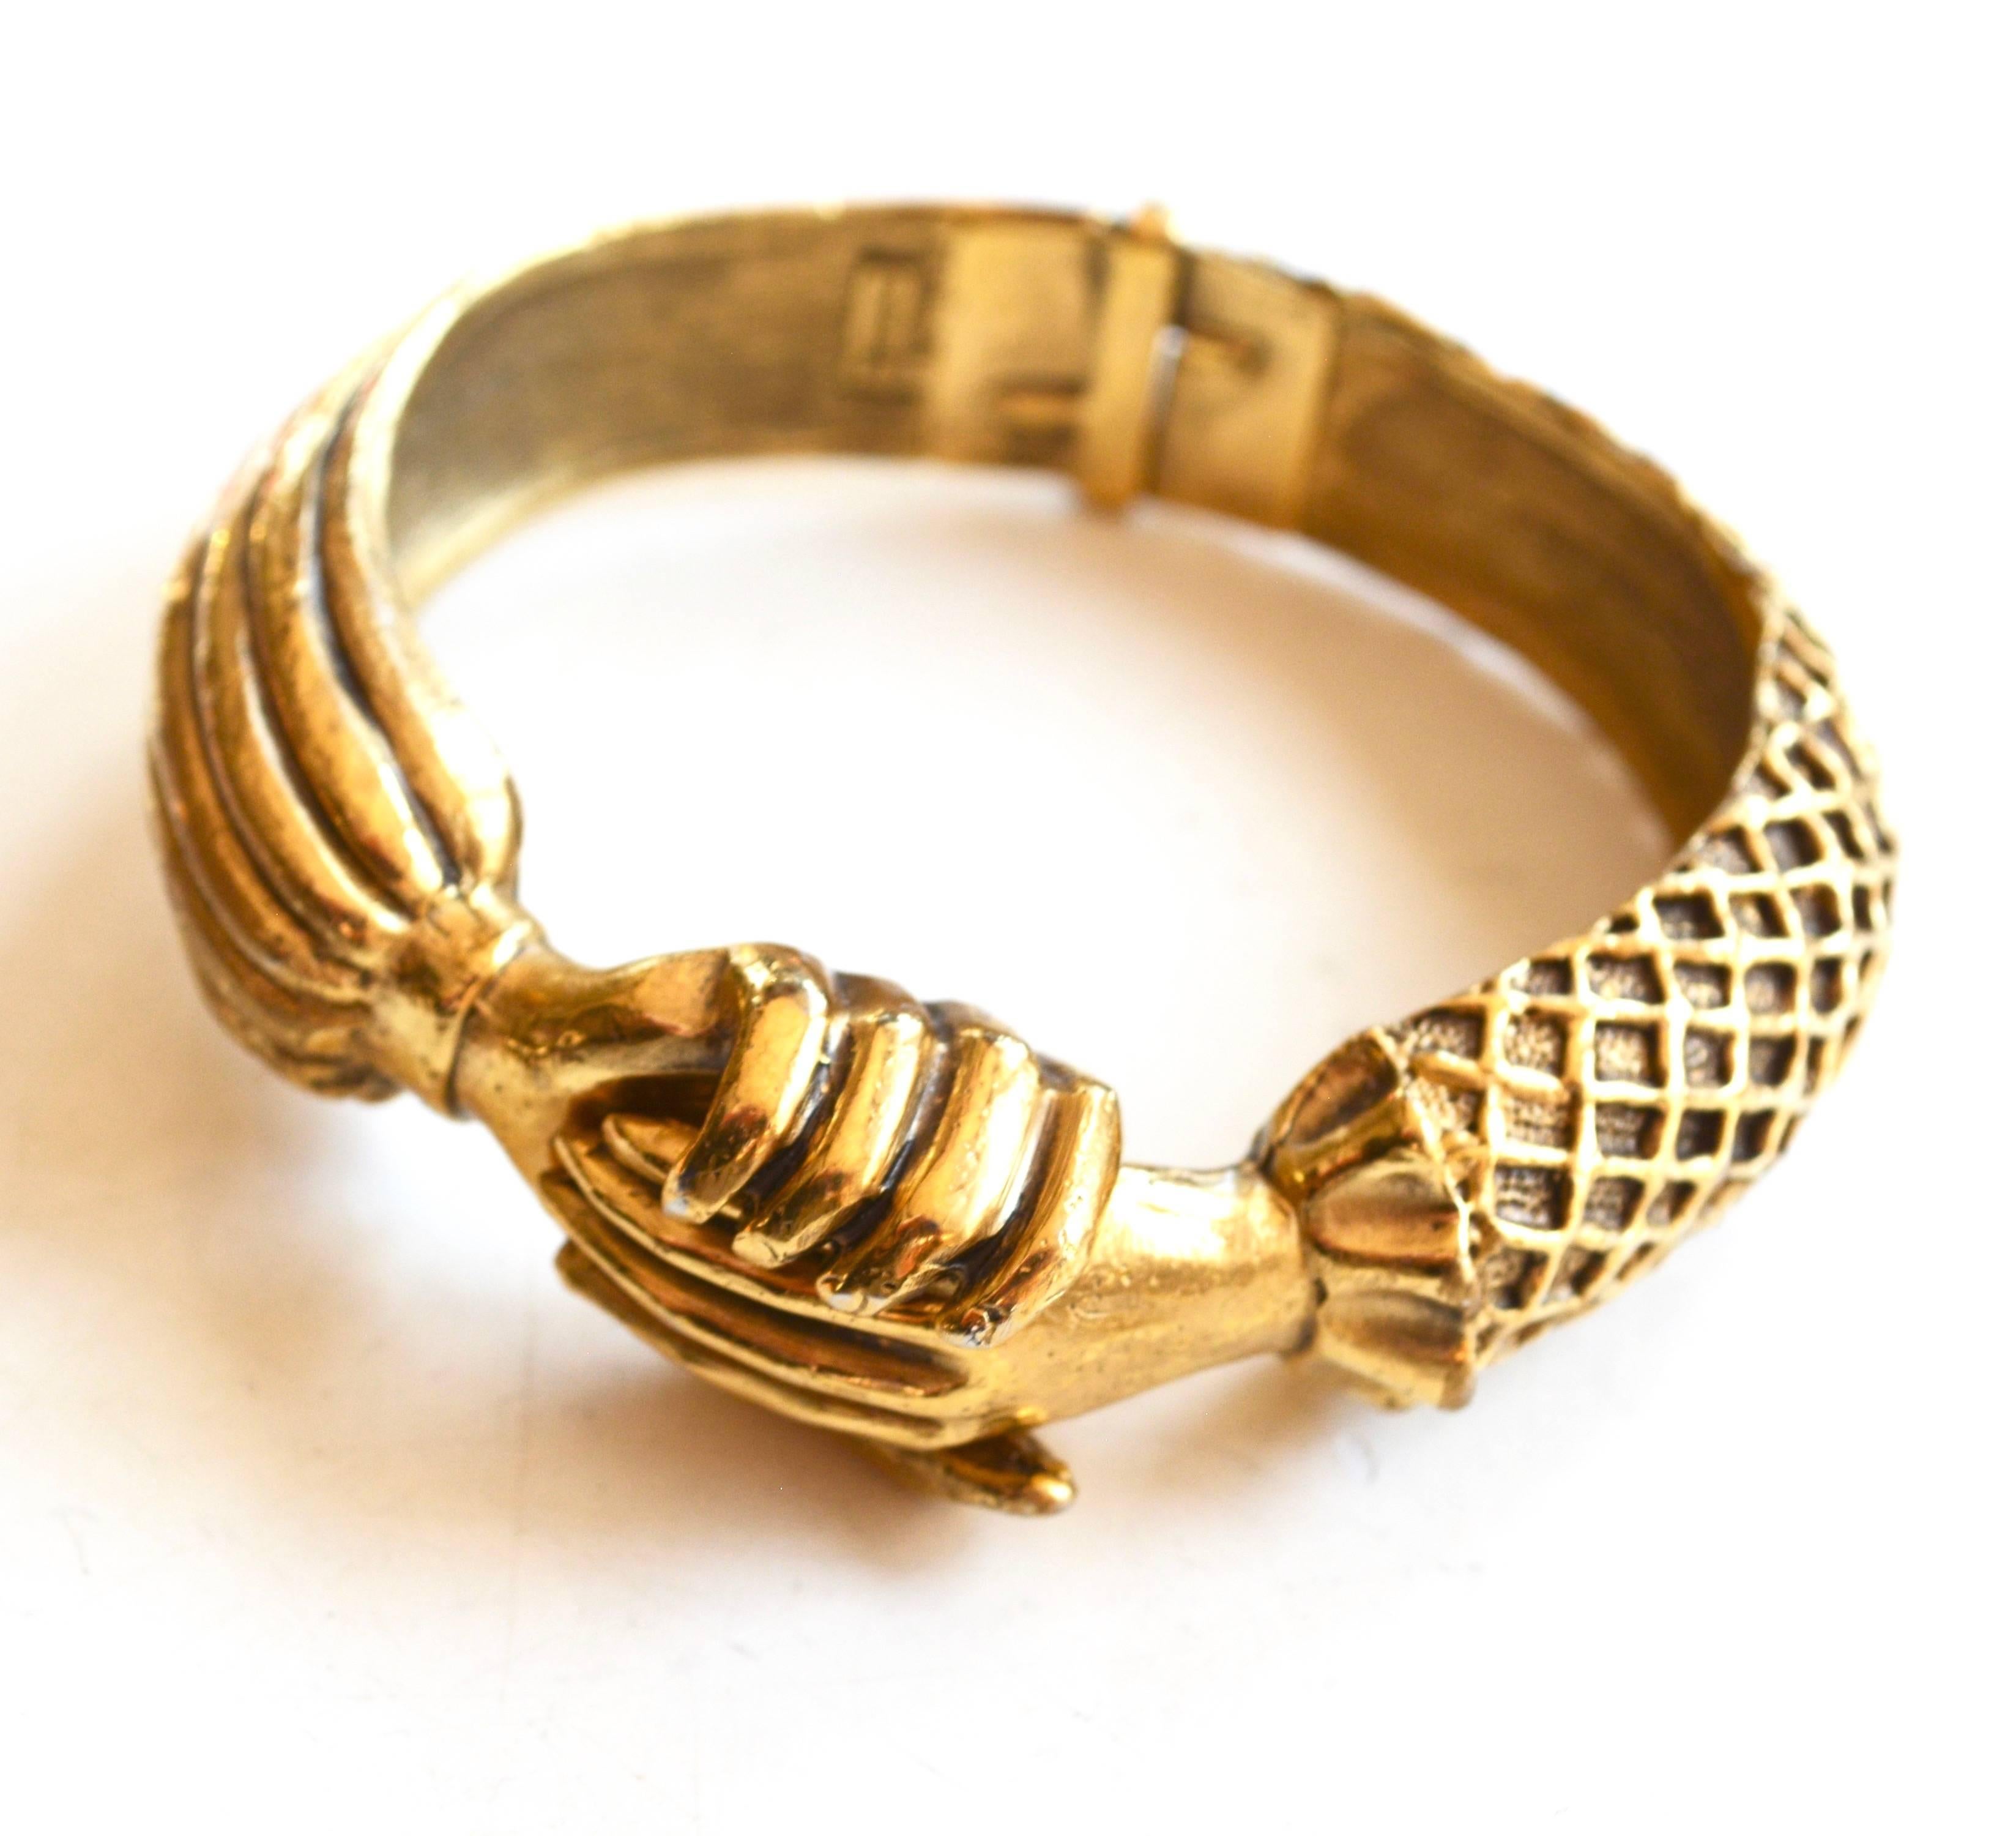 Diane Love for Trifari Hand Bracelet In Excellent Condition For Sale In Litchfield County, CT